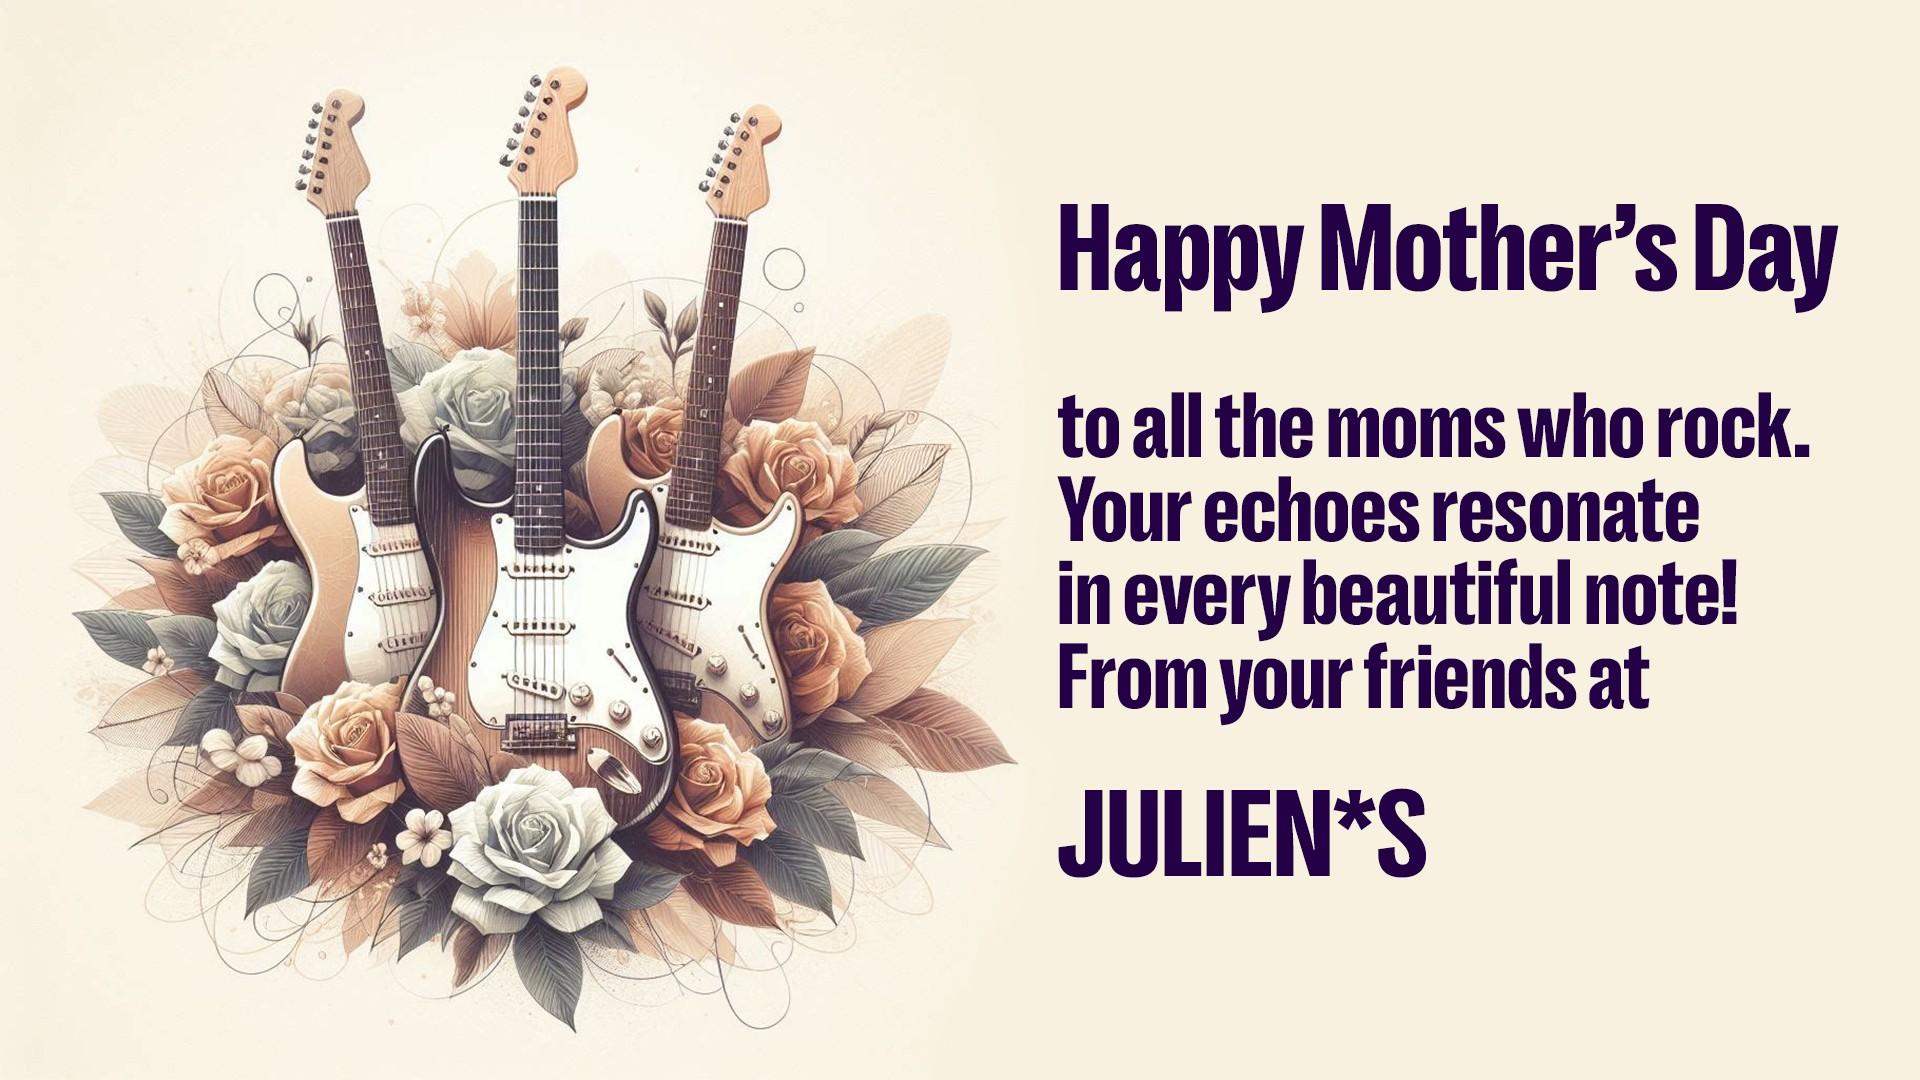 happy mother 's day to all the moms who rock . your echoes resonate in every beautiful note ! from your friends at julien * s